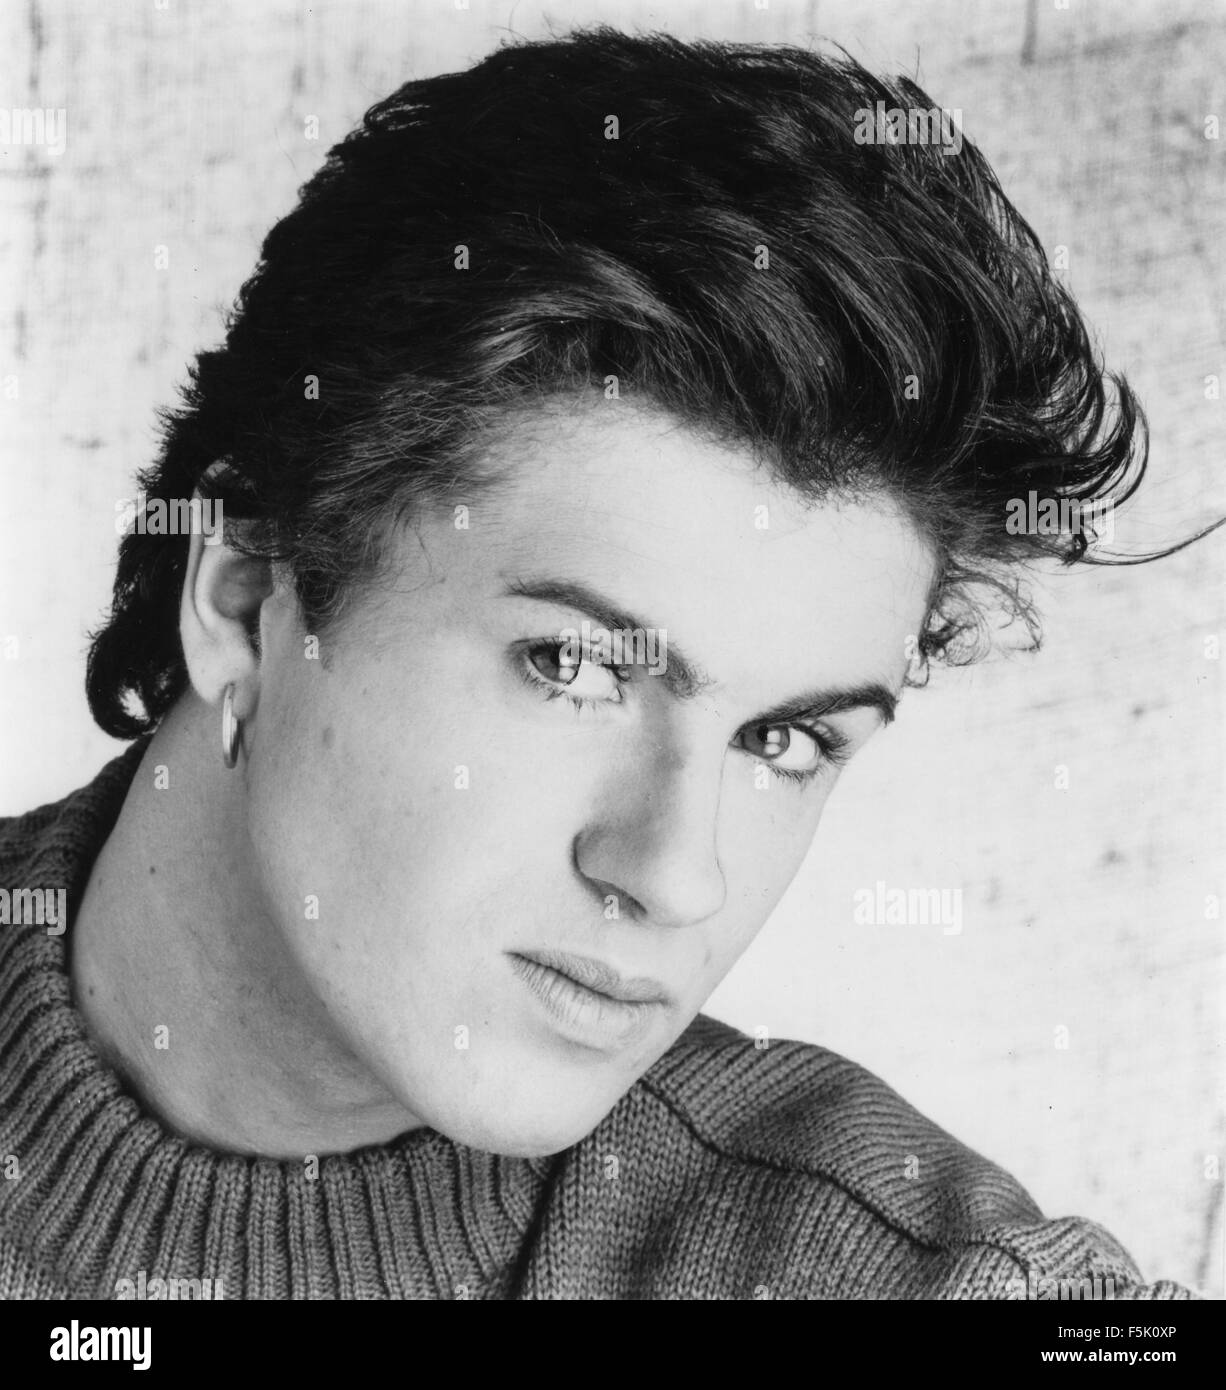 GEORGE MICHAEL  Promotional phopto of UK pop musician about 1984 Stock Photo